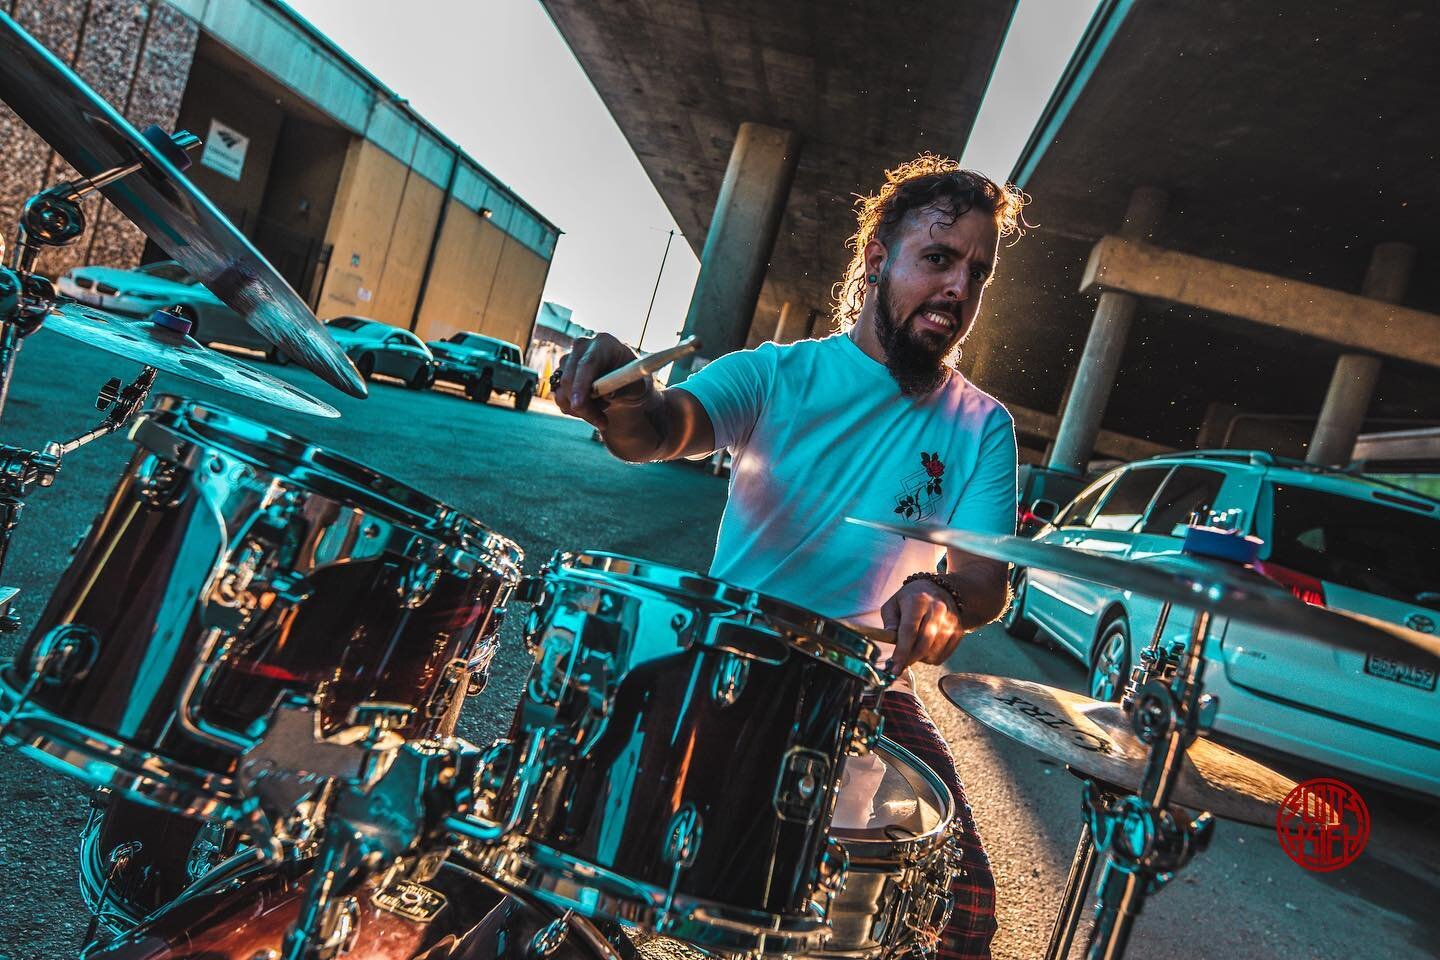 check out these awesome shots with BETO @beatalks 
Drummer/Percussionist/Producer

We roamed around DTLA and found a nice spot under the 10fwy where the sunlight peaked through for the #goldenhour very happy the way these shots turned out. Be sure to